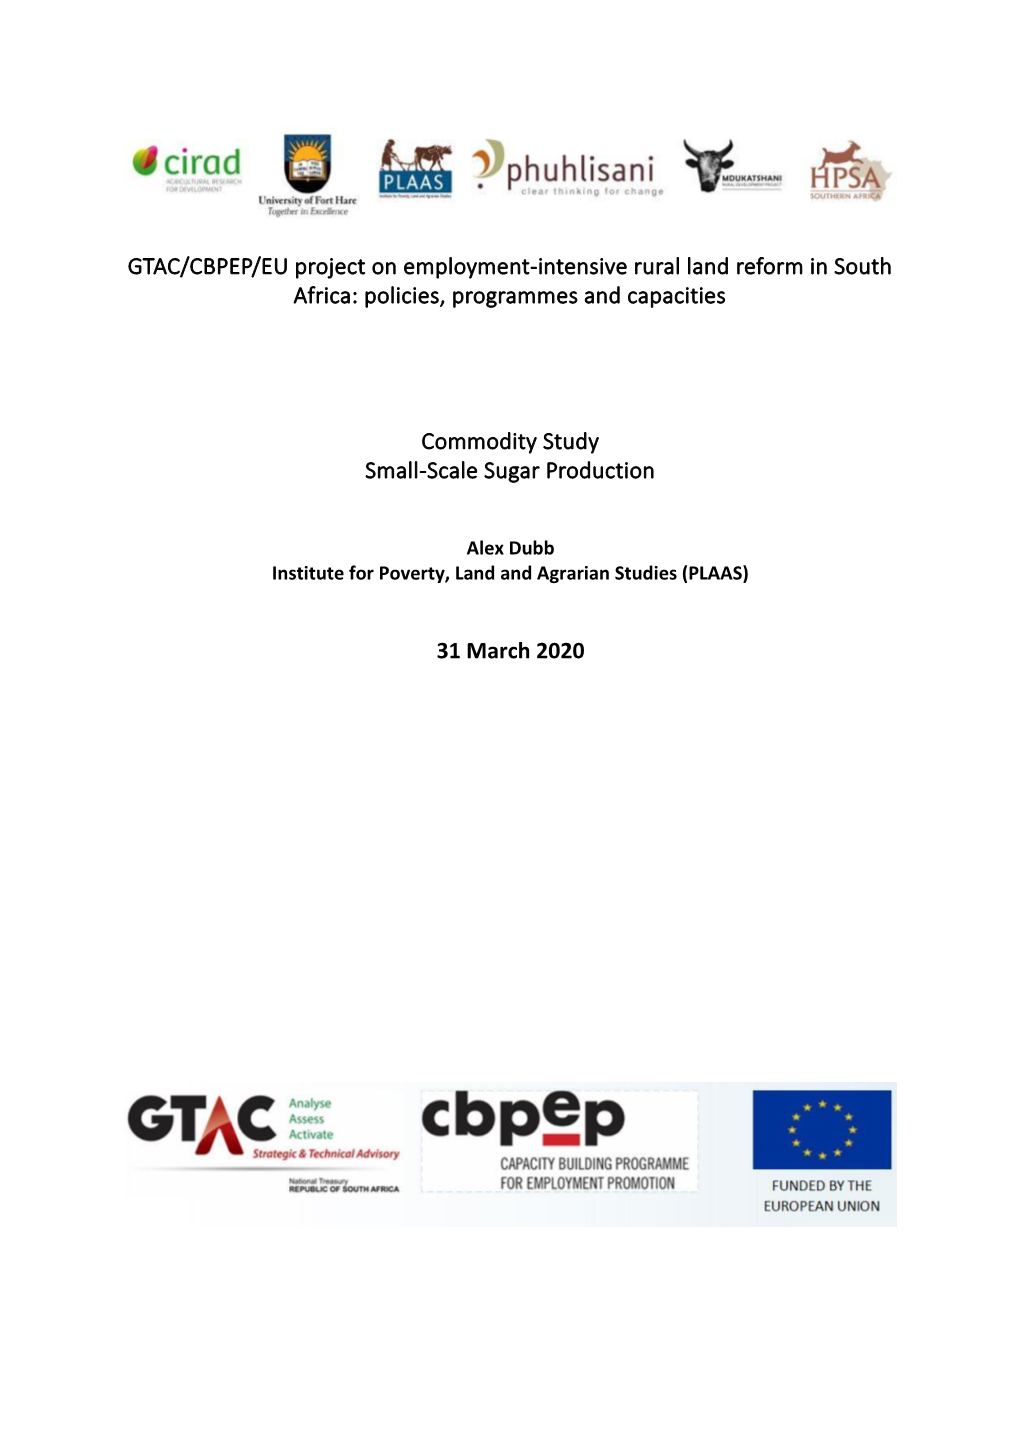 GTAC/CBPEP/EU Project on Employment-Intensive Rural Land Reform in South Africa: Policies, Programmes and Capacities Commodity